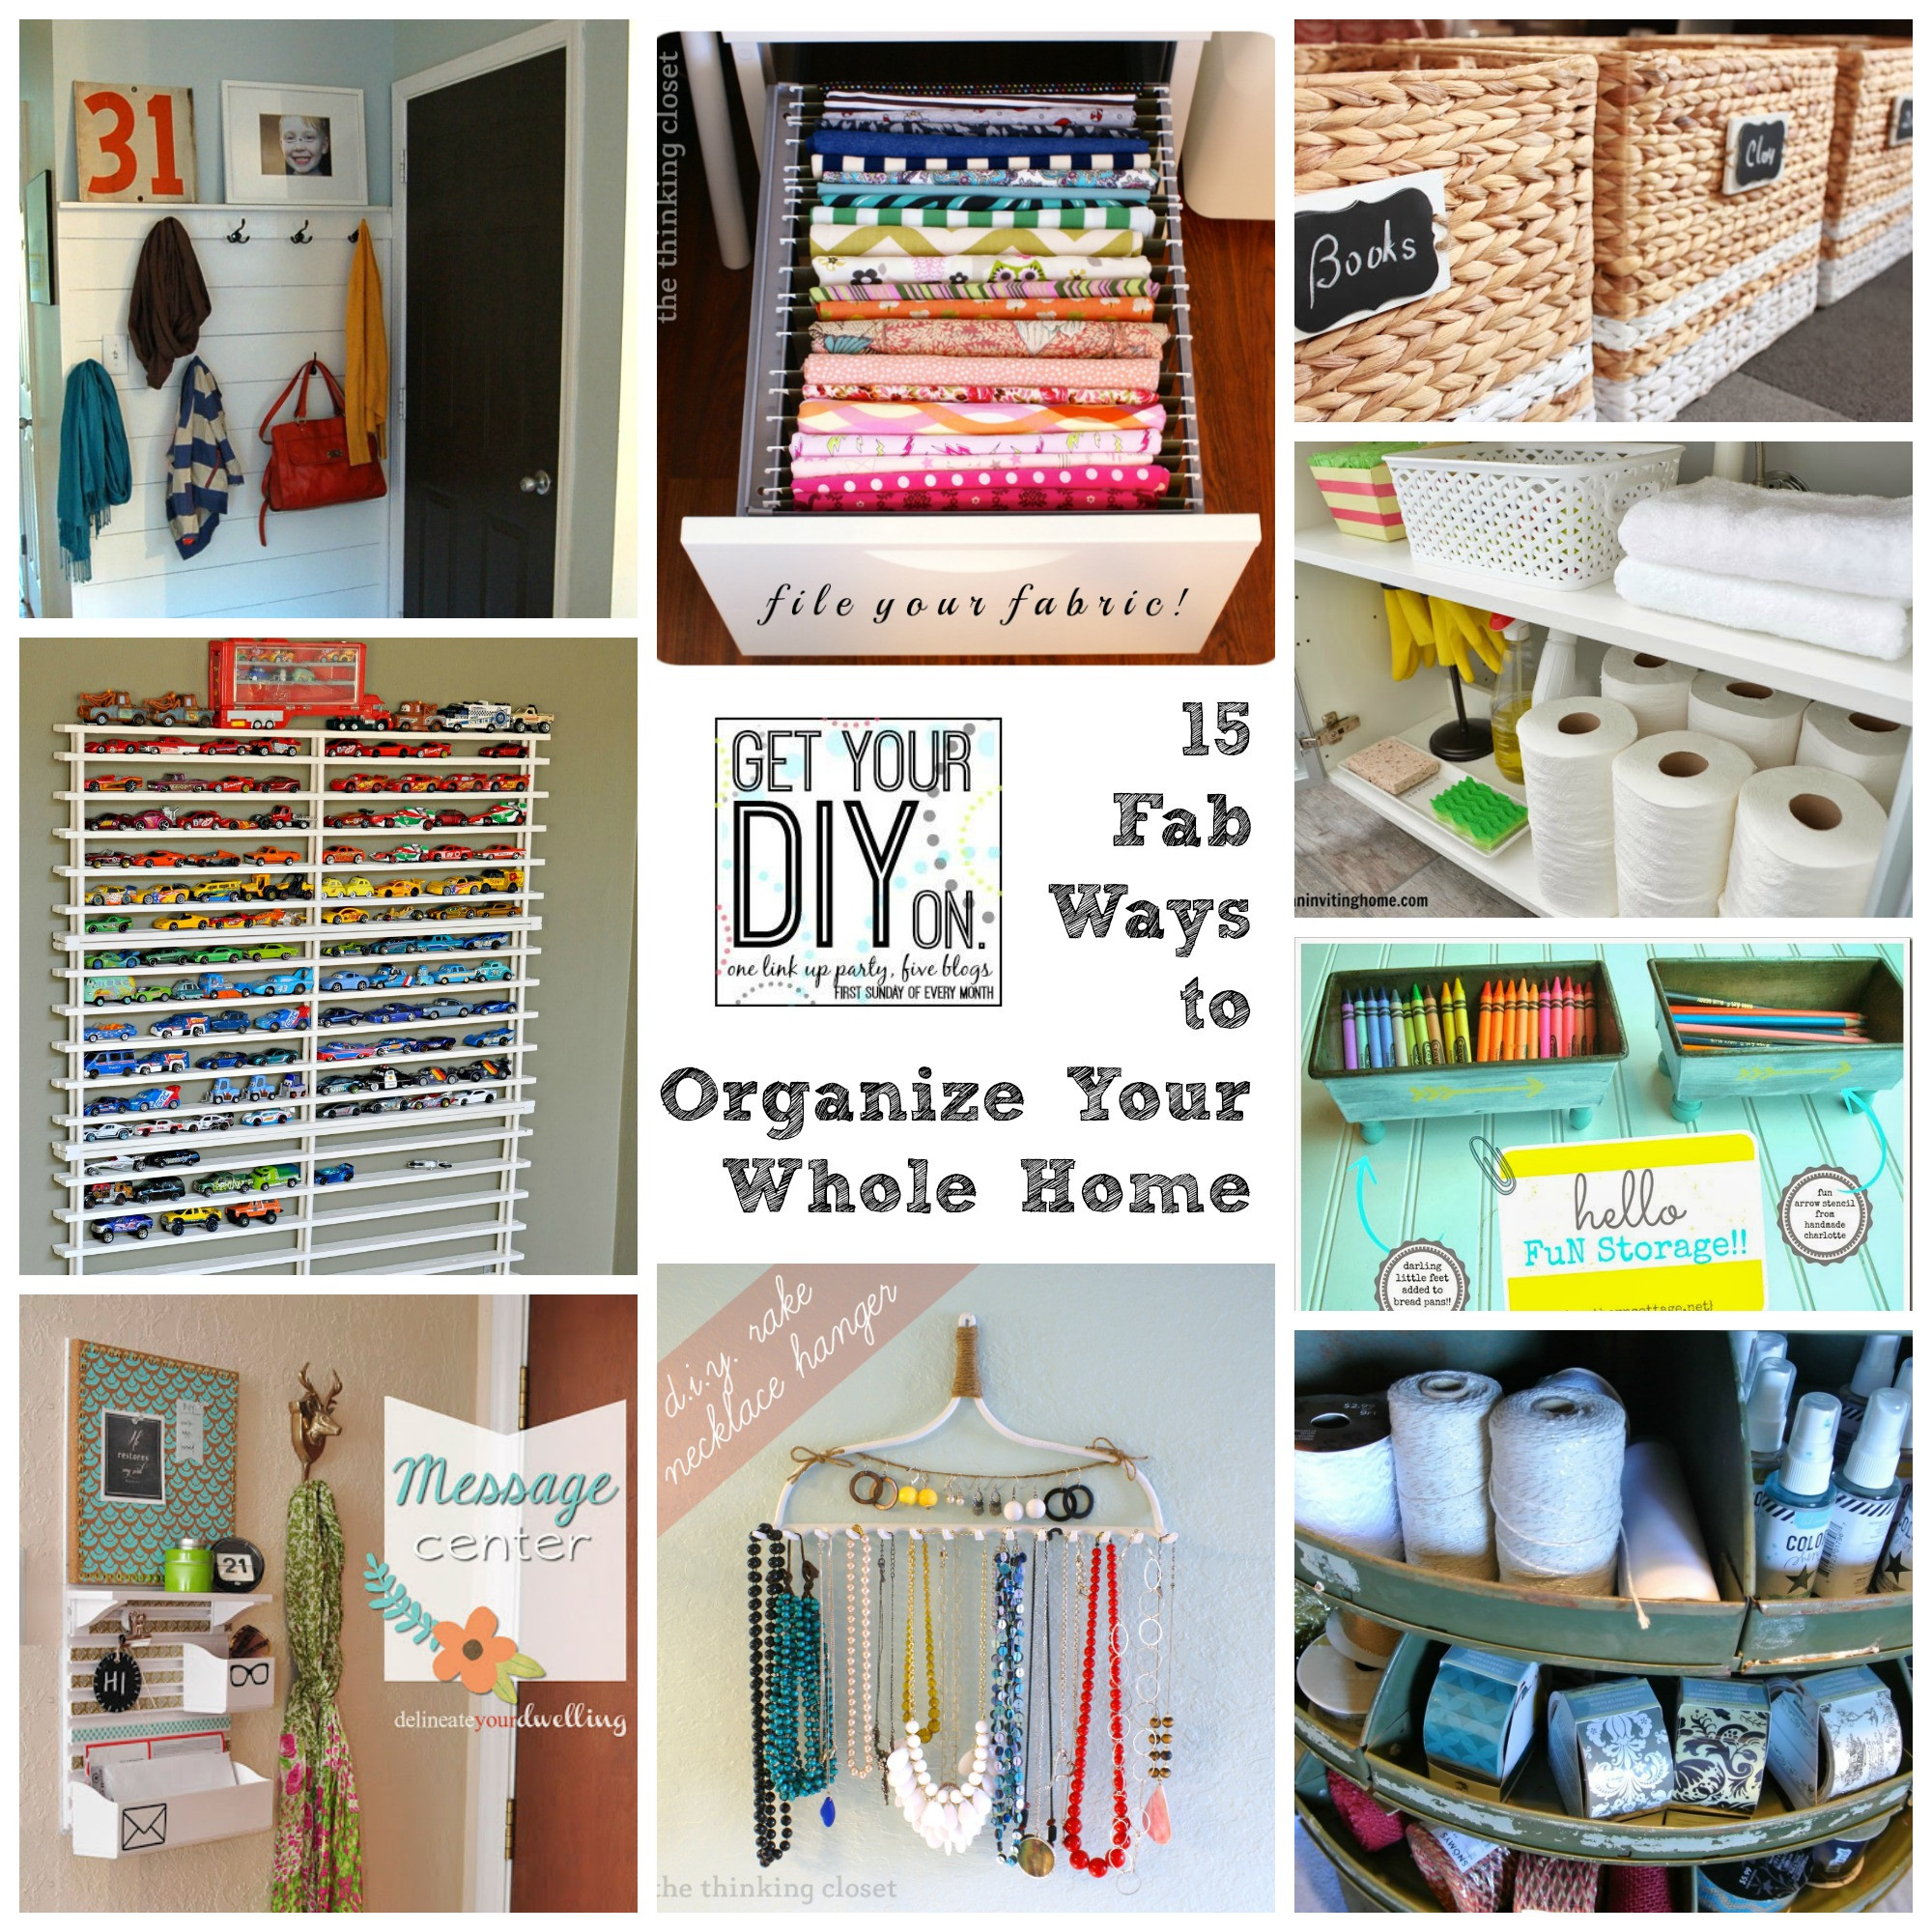 DIY Home Organizing Ideas
 15 Fabulous Organizing Ideas for Your Whole House DIY Challenge